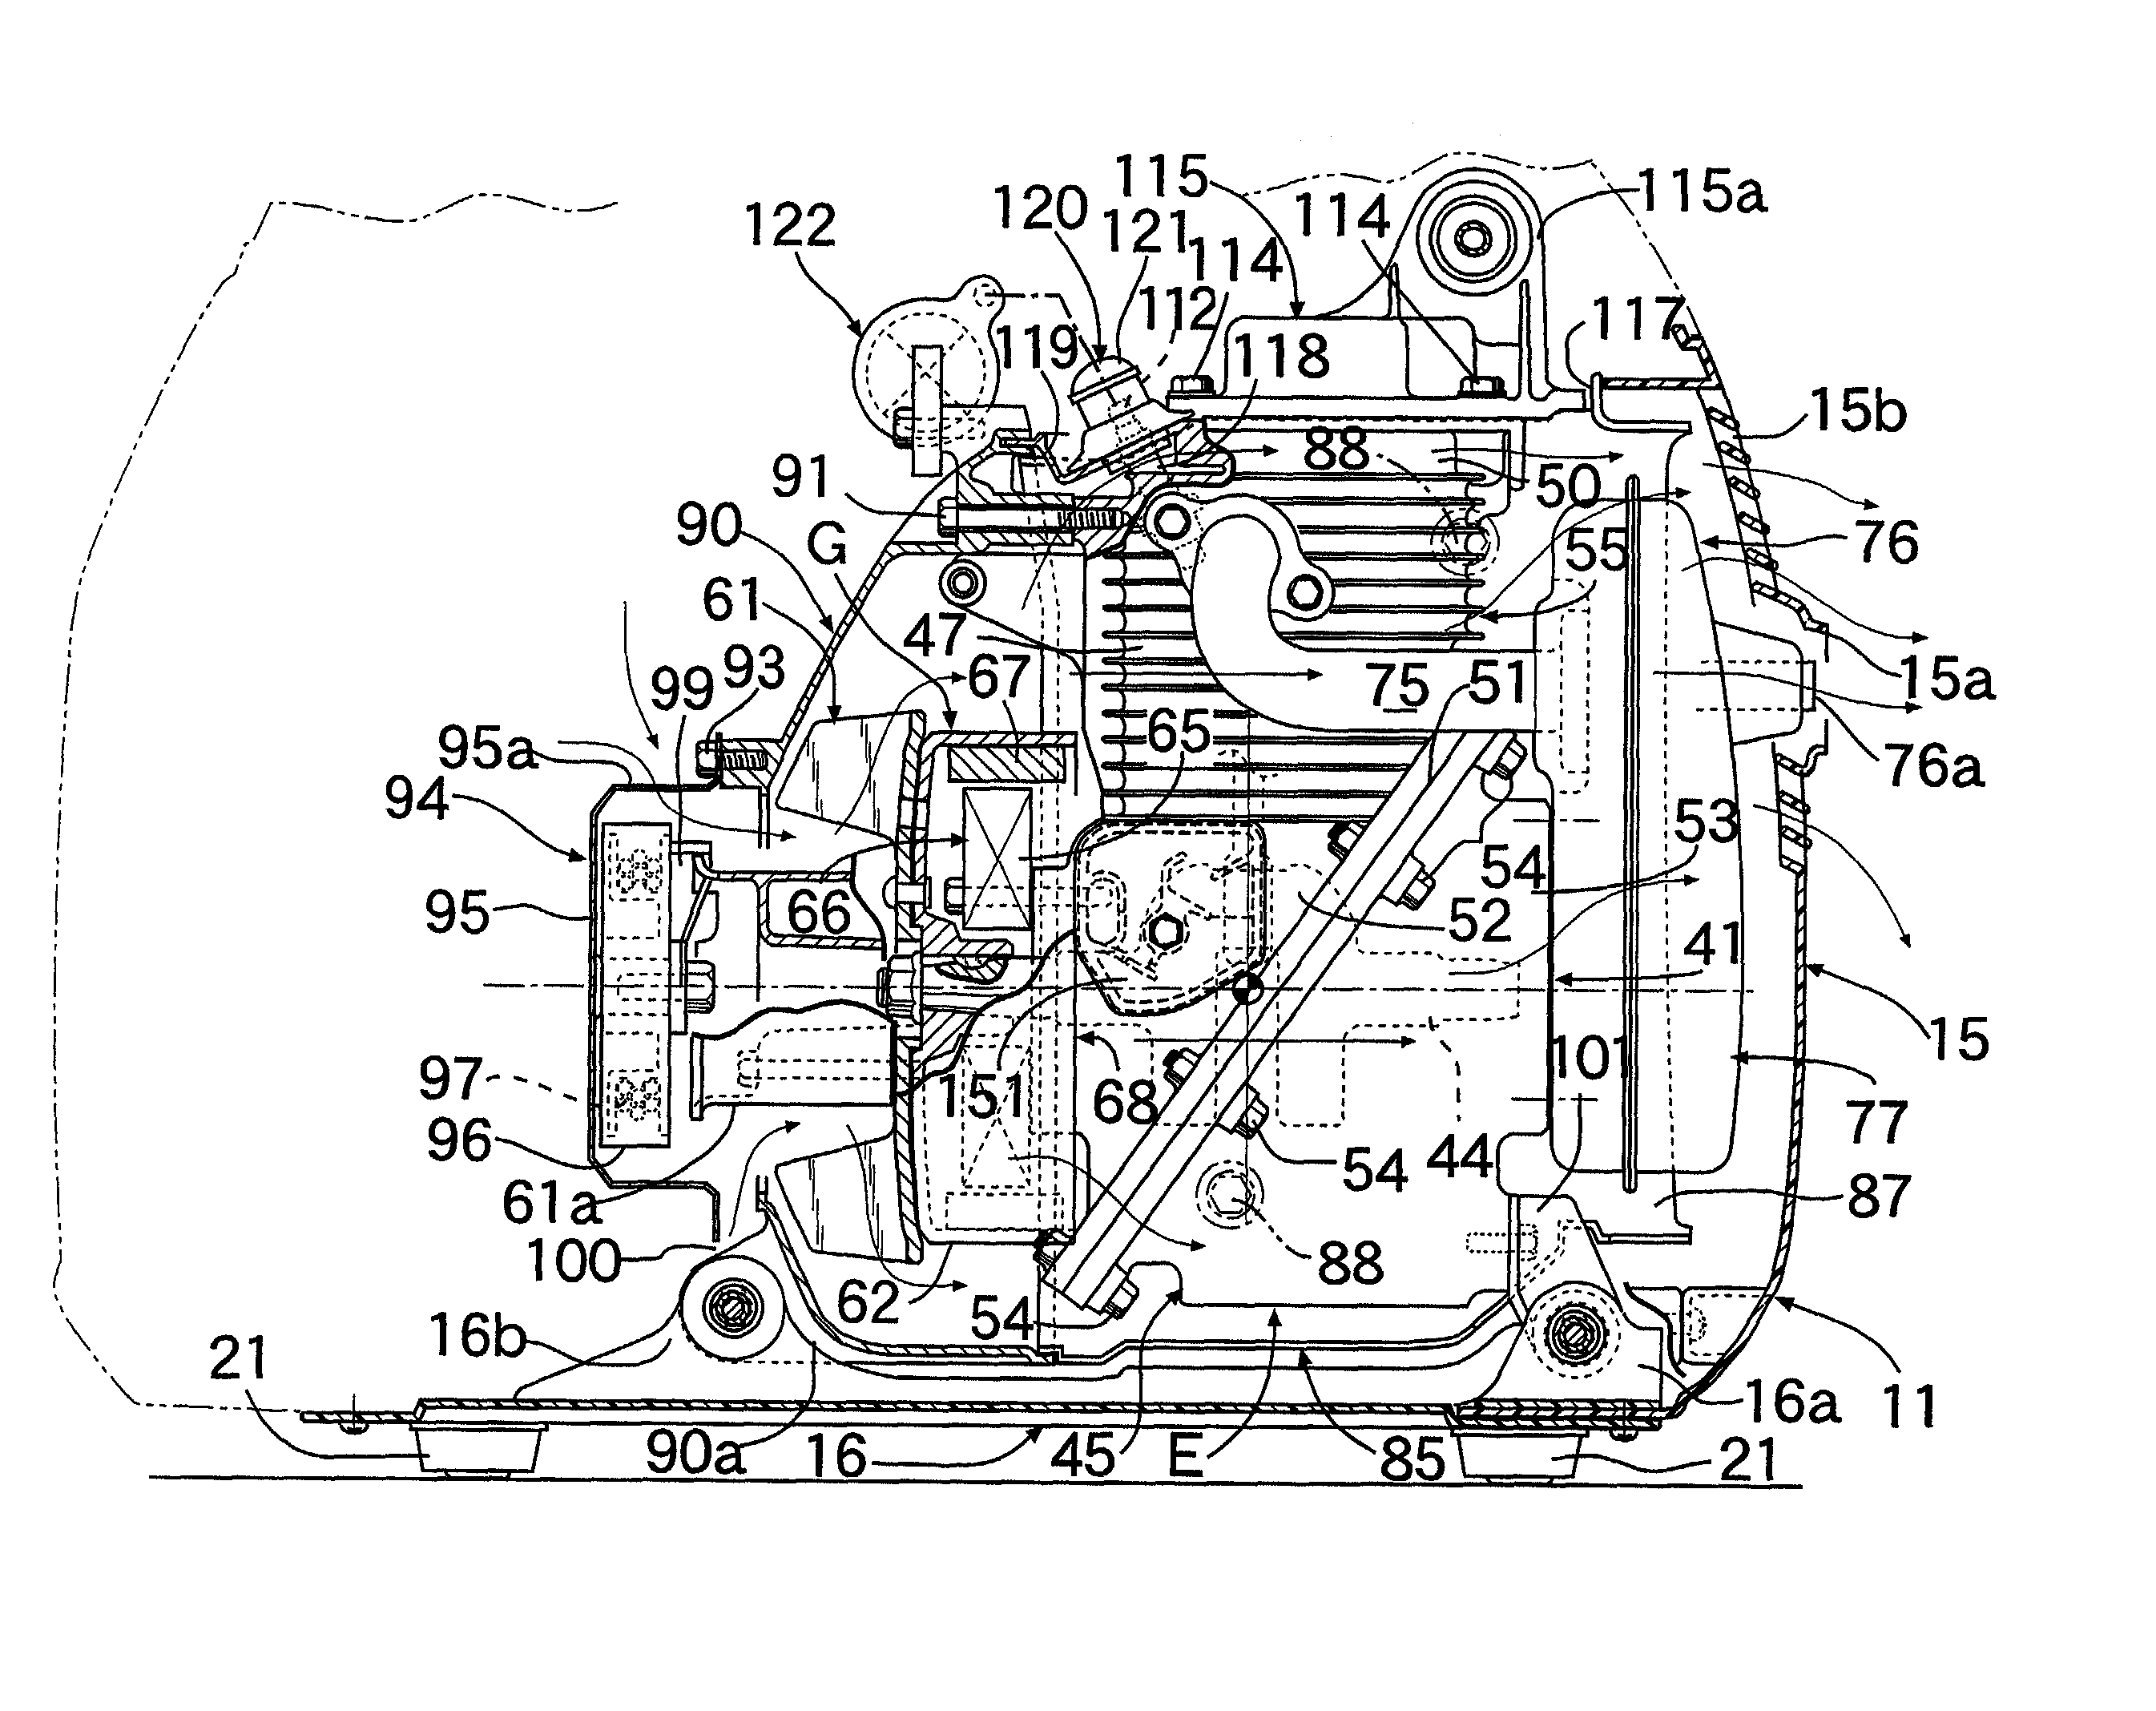 Lubrication structure in OHC engine